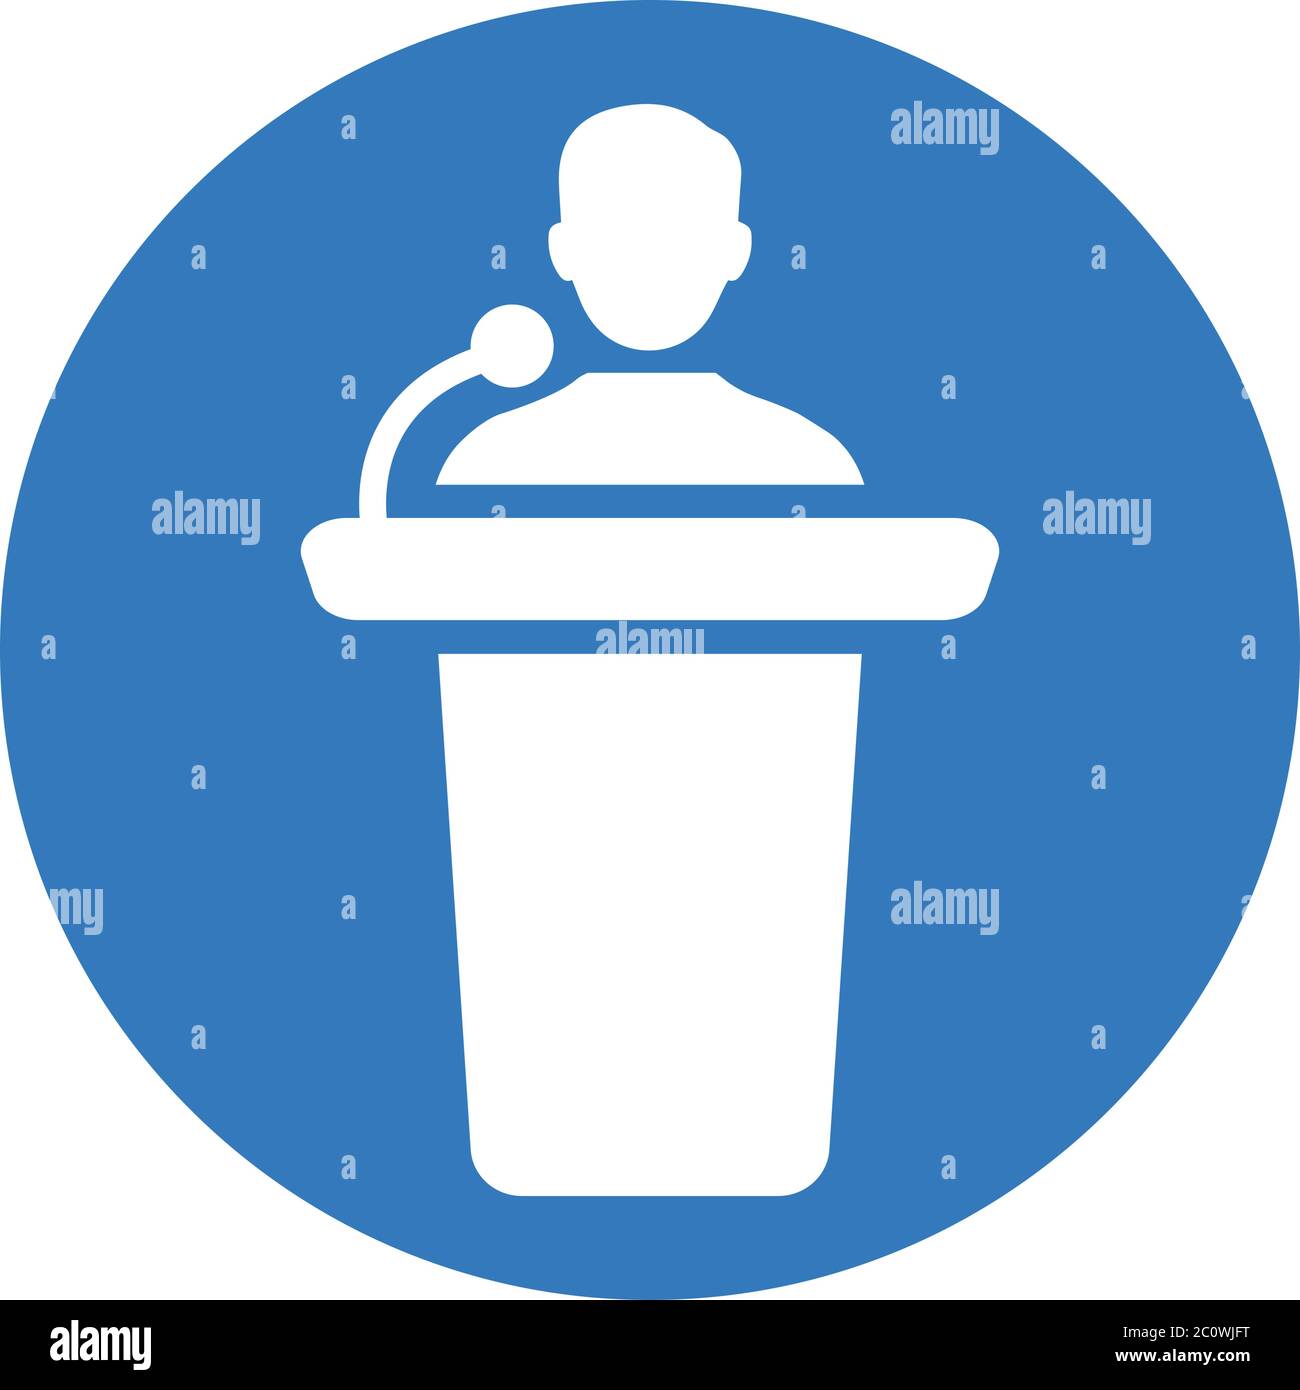 Beautiful, meticulously designed of Conference presentation icon, presenter, speaker. Stock Vector